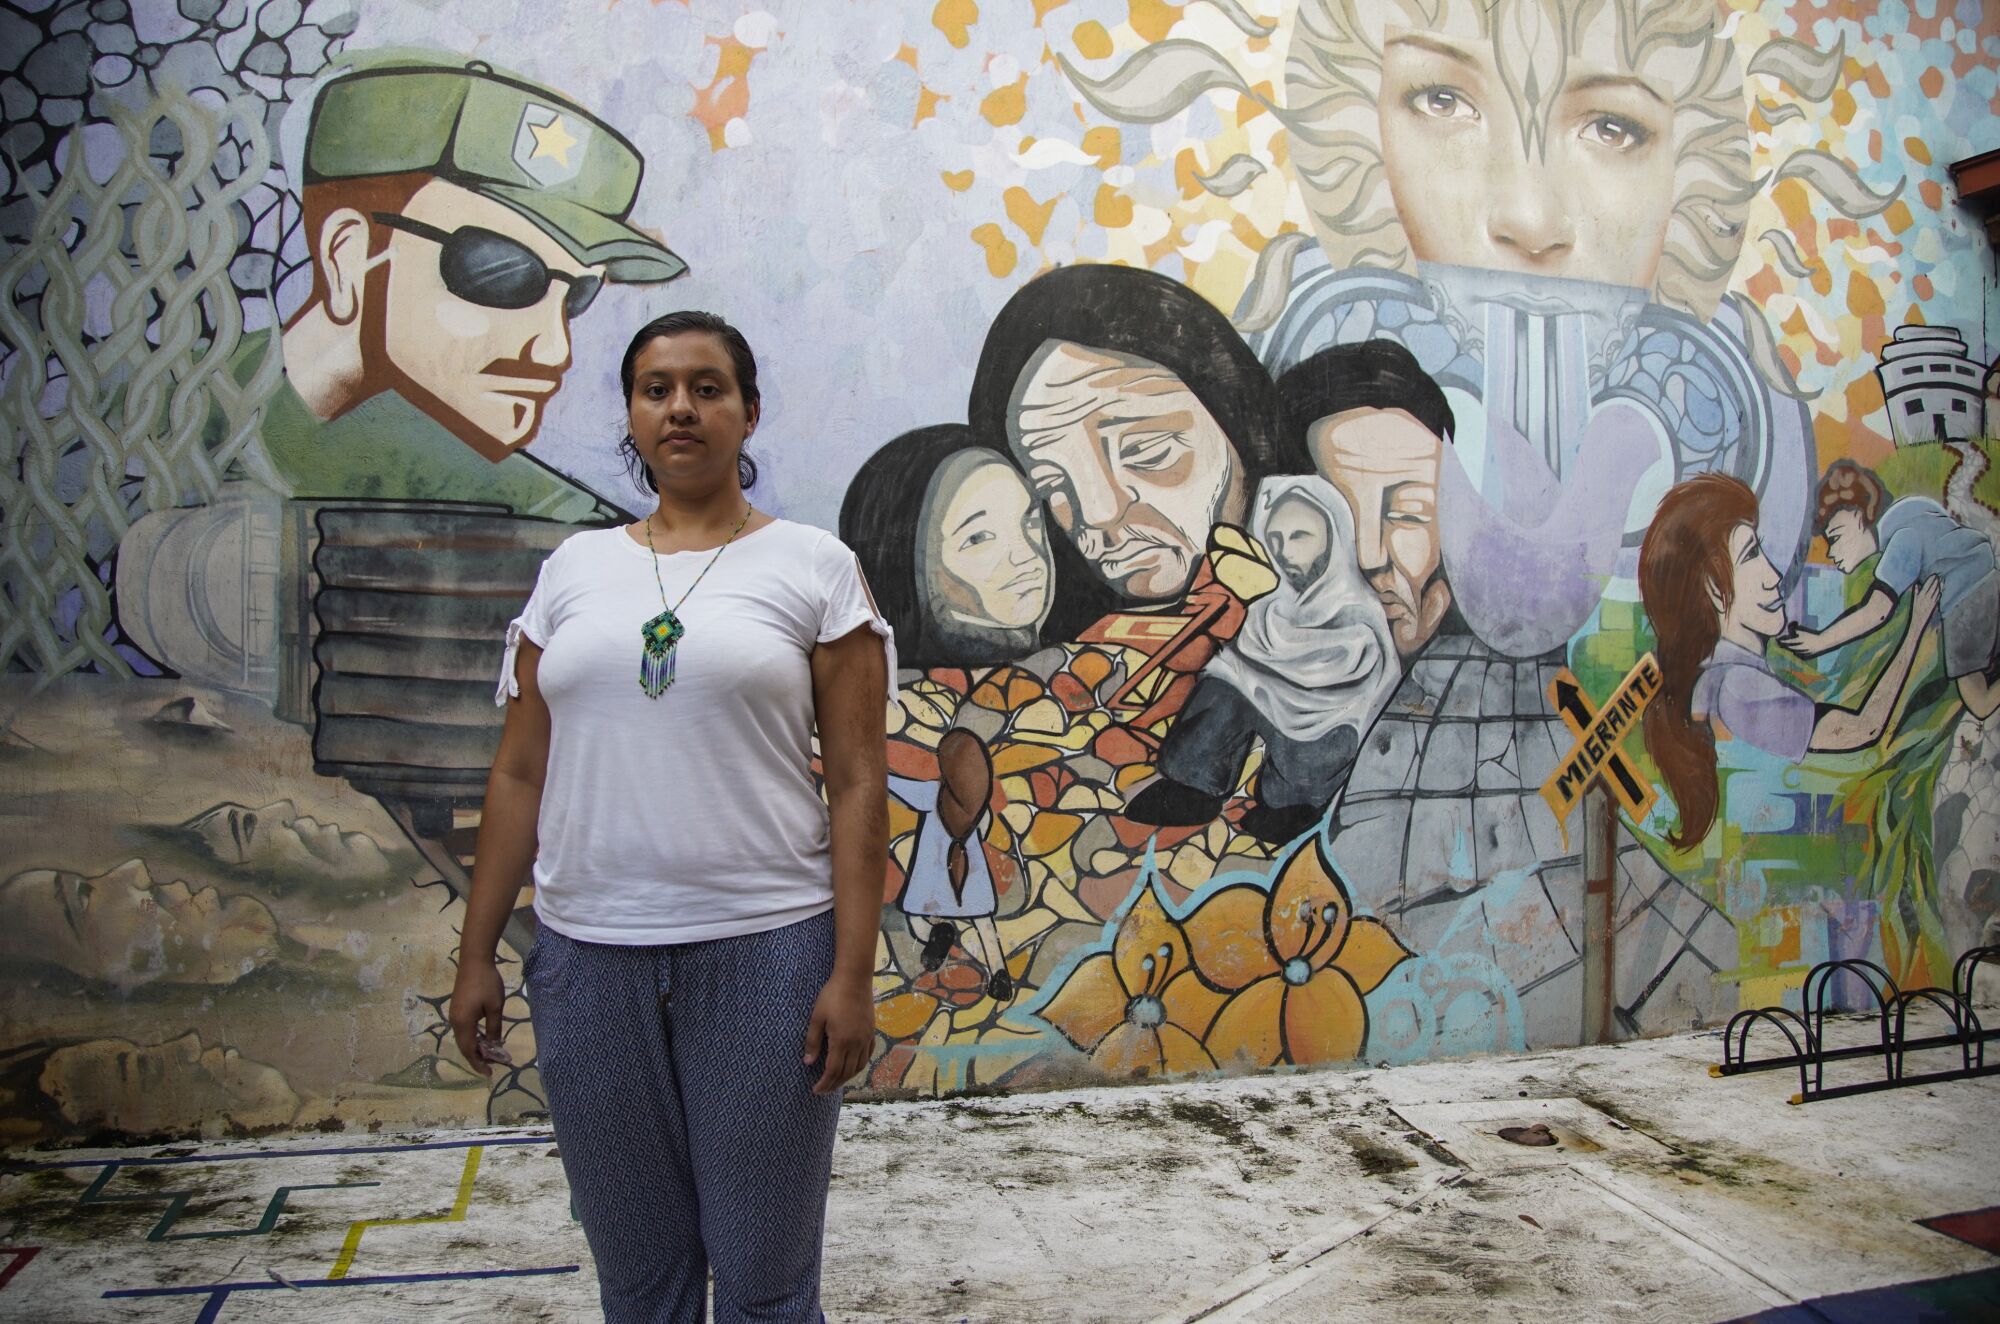 Yuriria Salvador stands in a courtyard in front of a mural of men, women and children